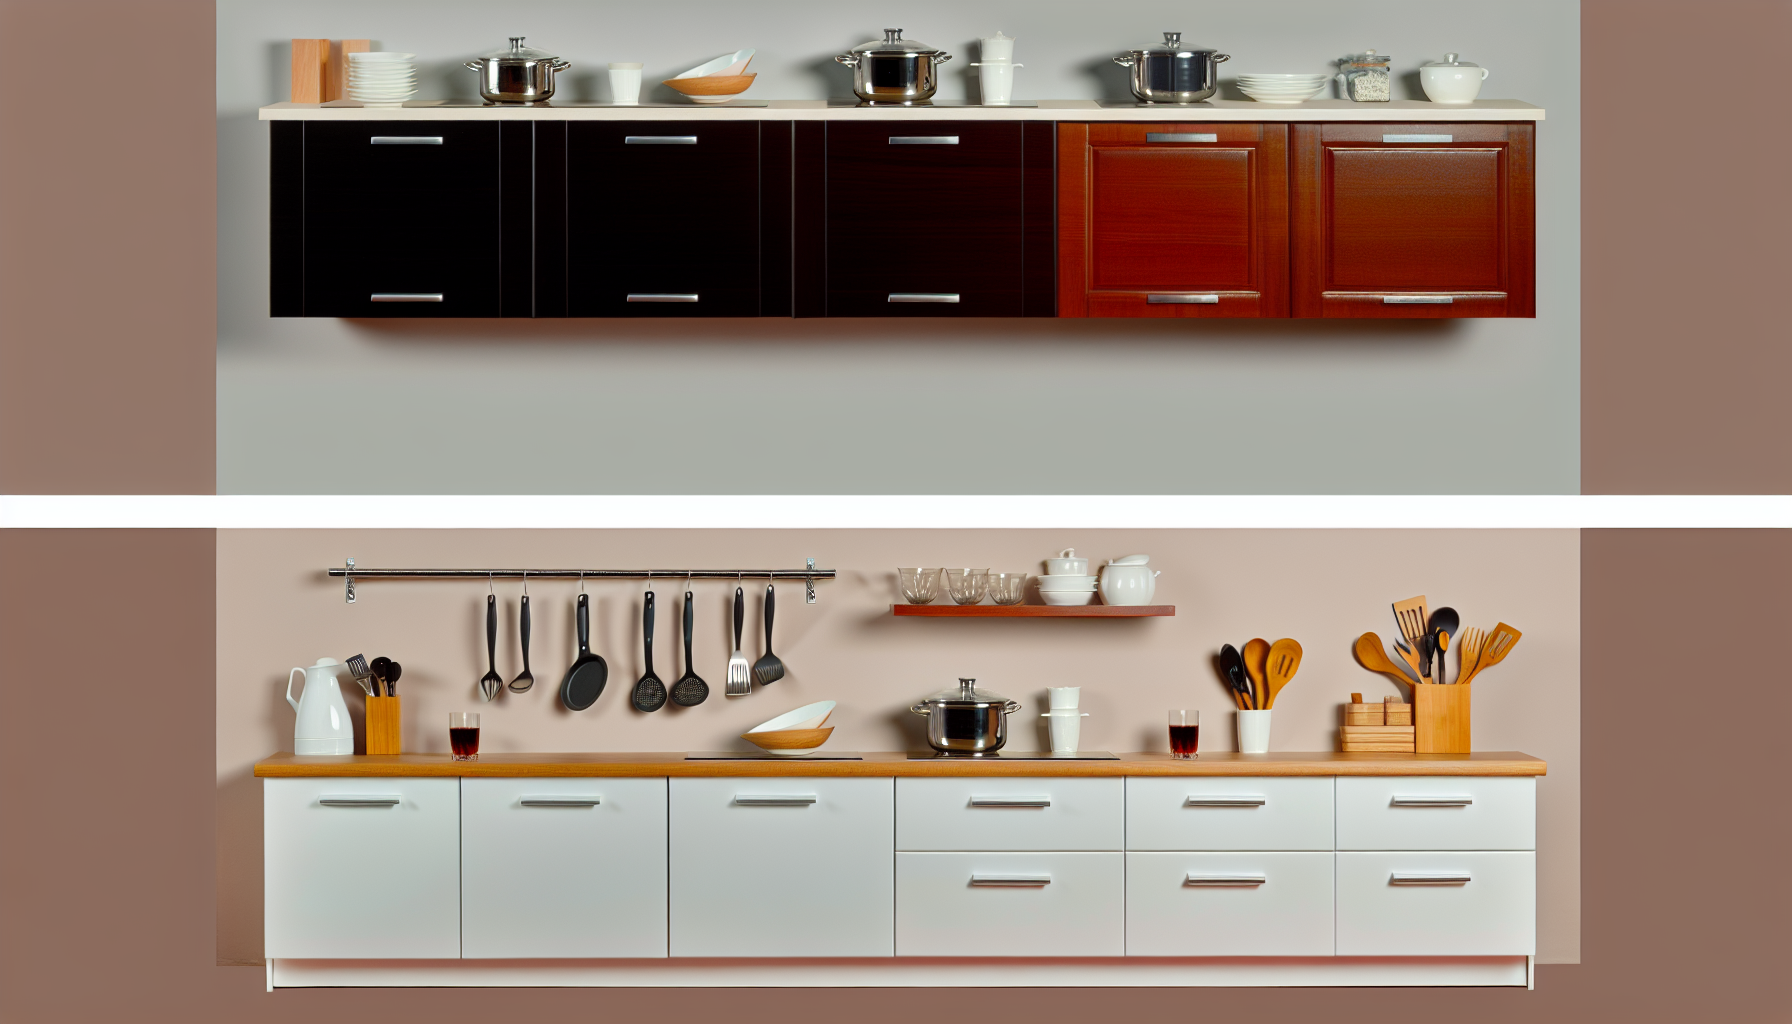 Variety of kitchen cabinet materials including wood, laminate, and thermofoil